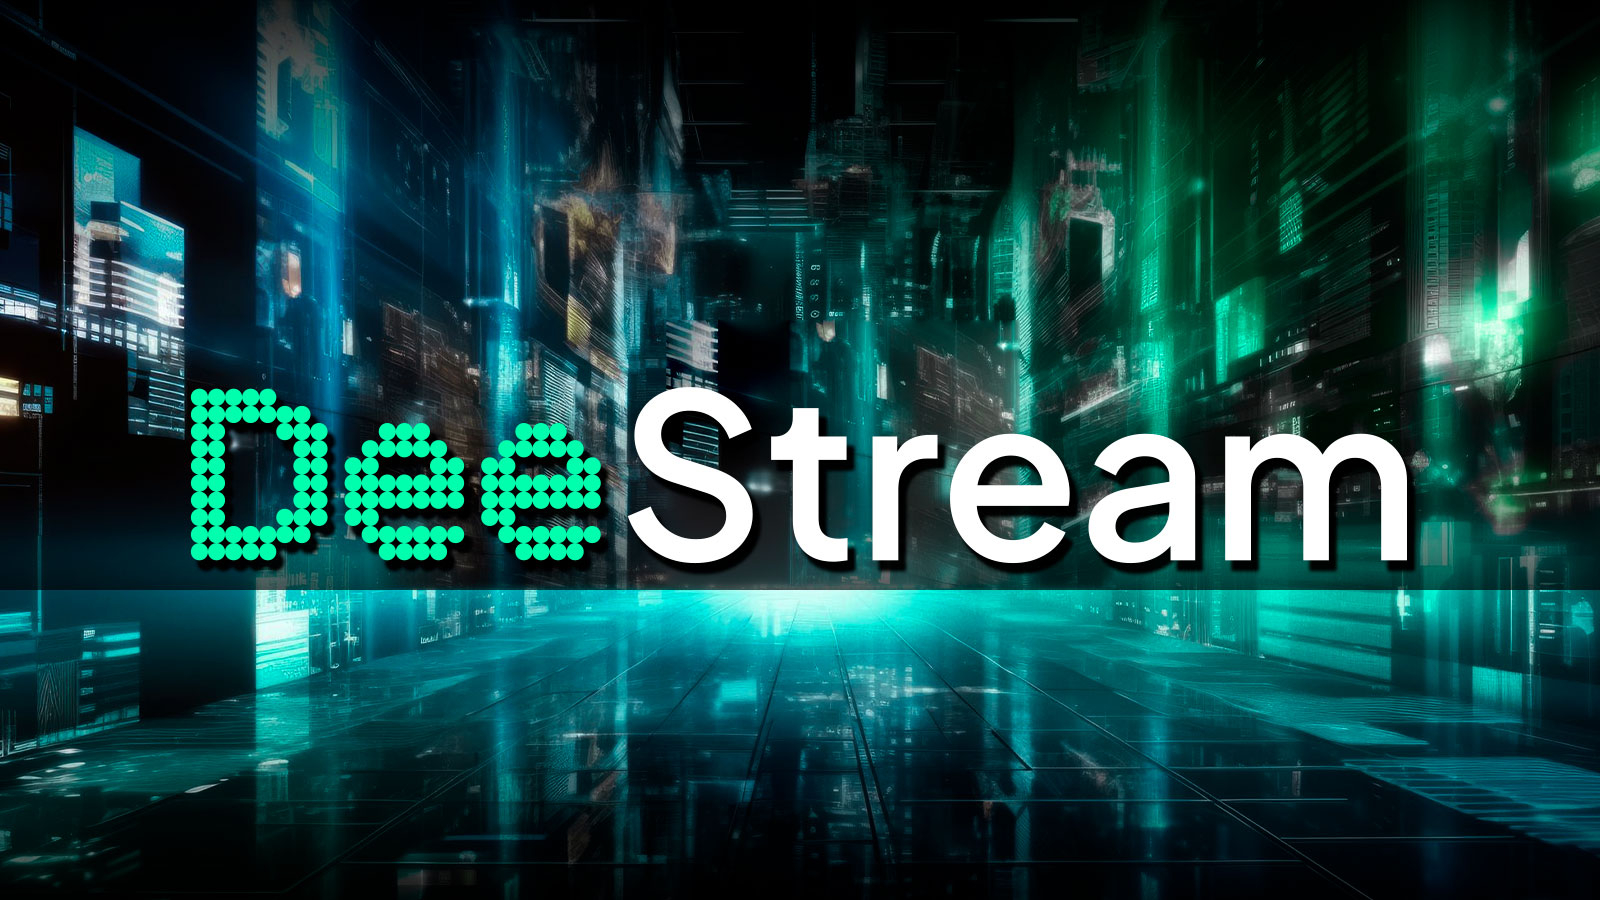 DeeStream (DST) Pushes More Content, Litecoin (LTC) & Binance Coin (BNB) Investors Anticipate Market Recovery